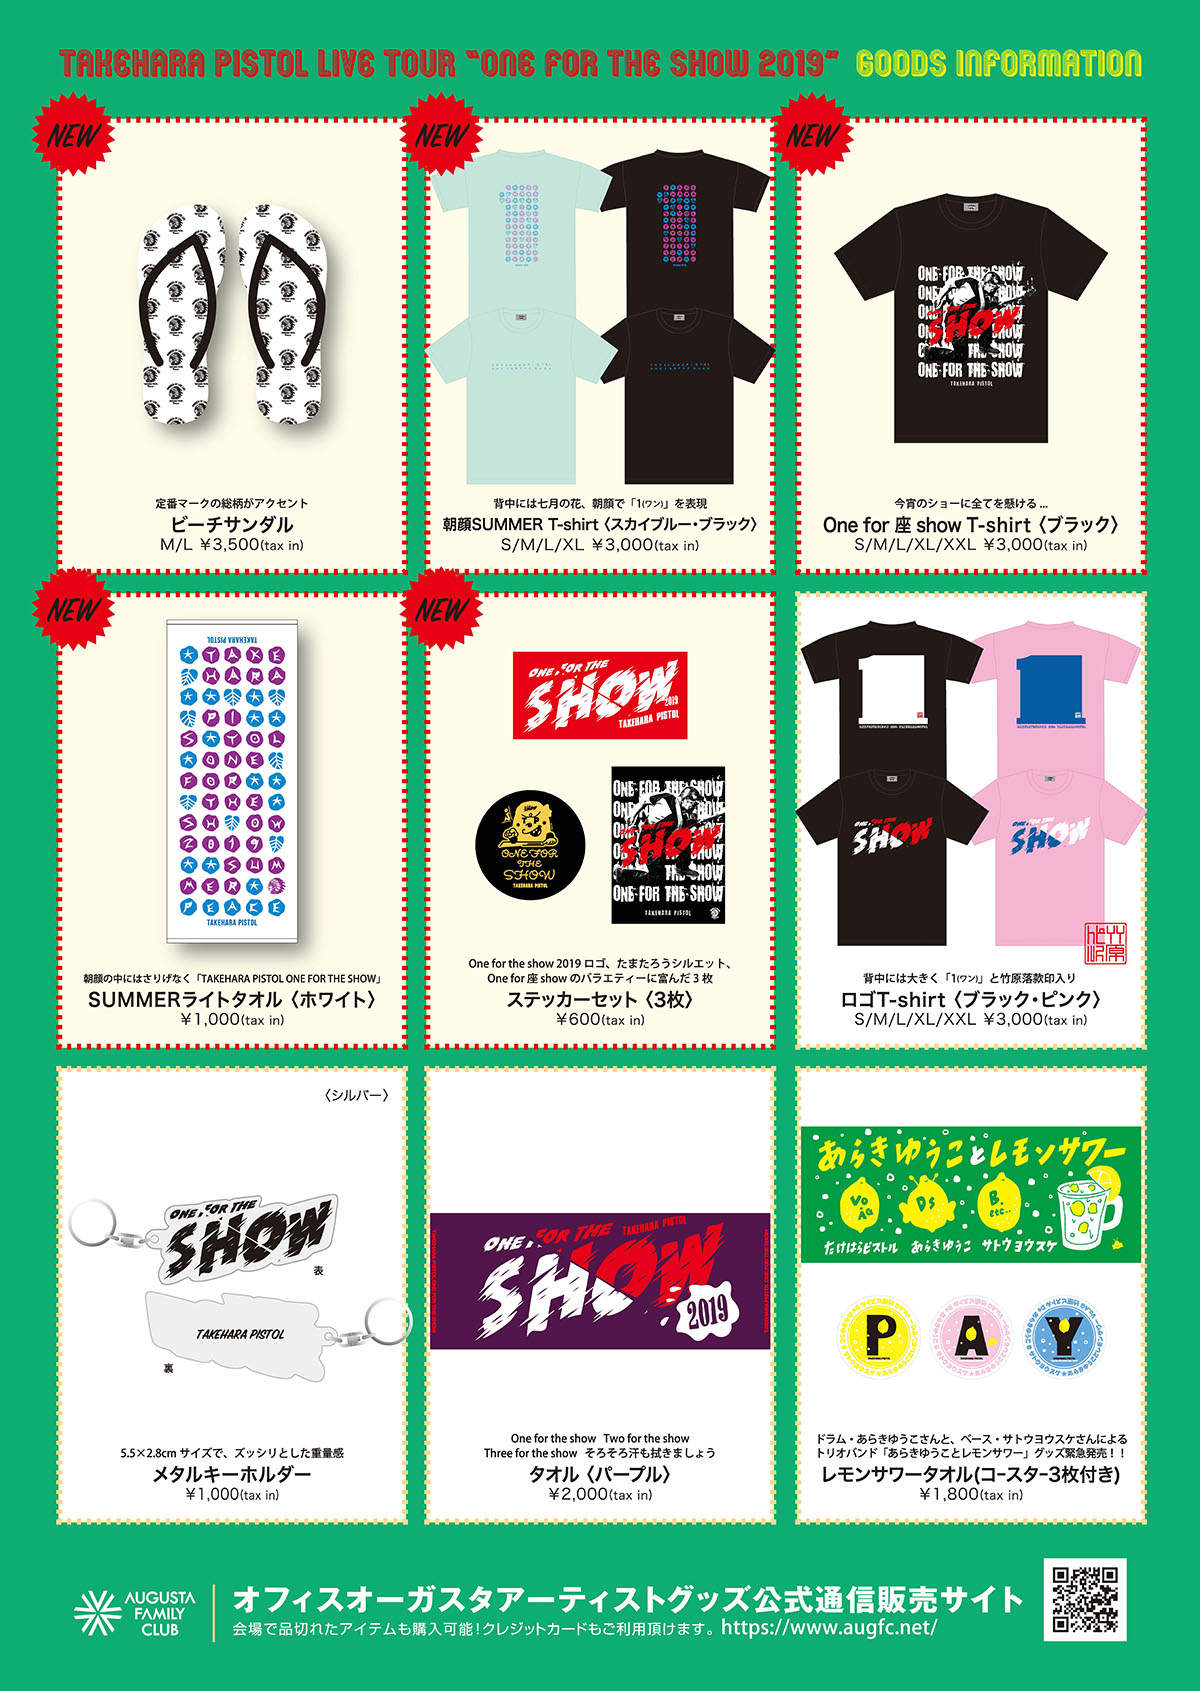 “One for the show tour 2019” NEWアイテム GOODS